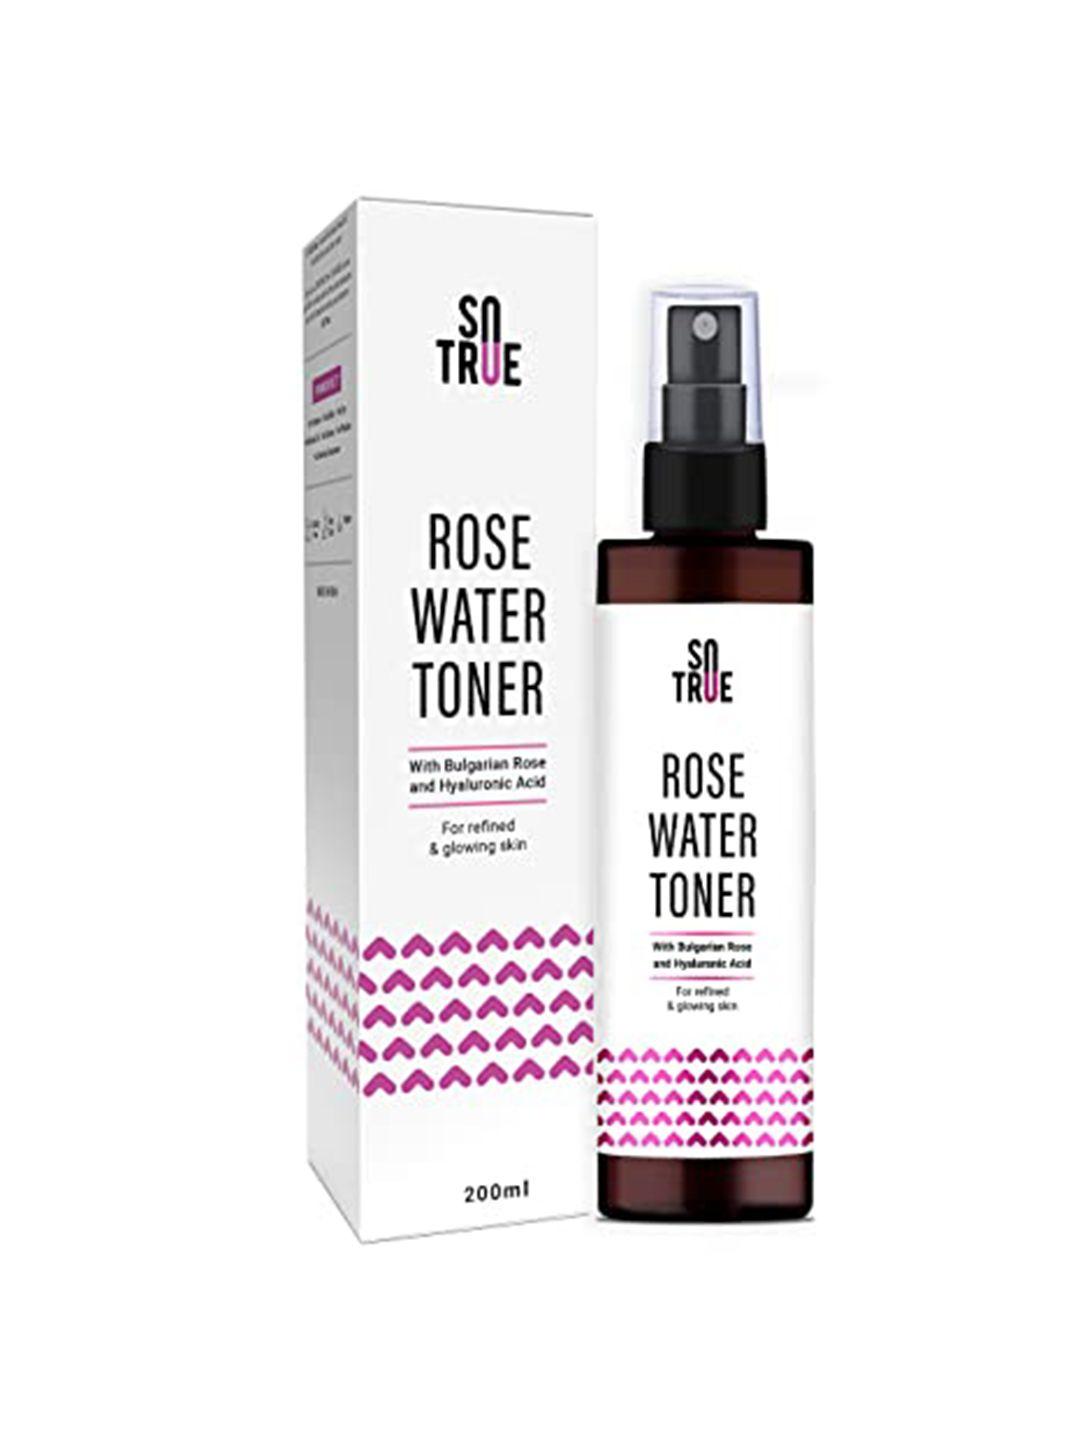 sotrue rose water alcohol-free face toner with bulgarian rose & hyaluronic acid - 200ml